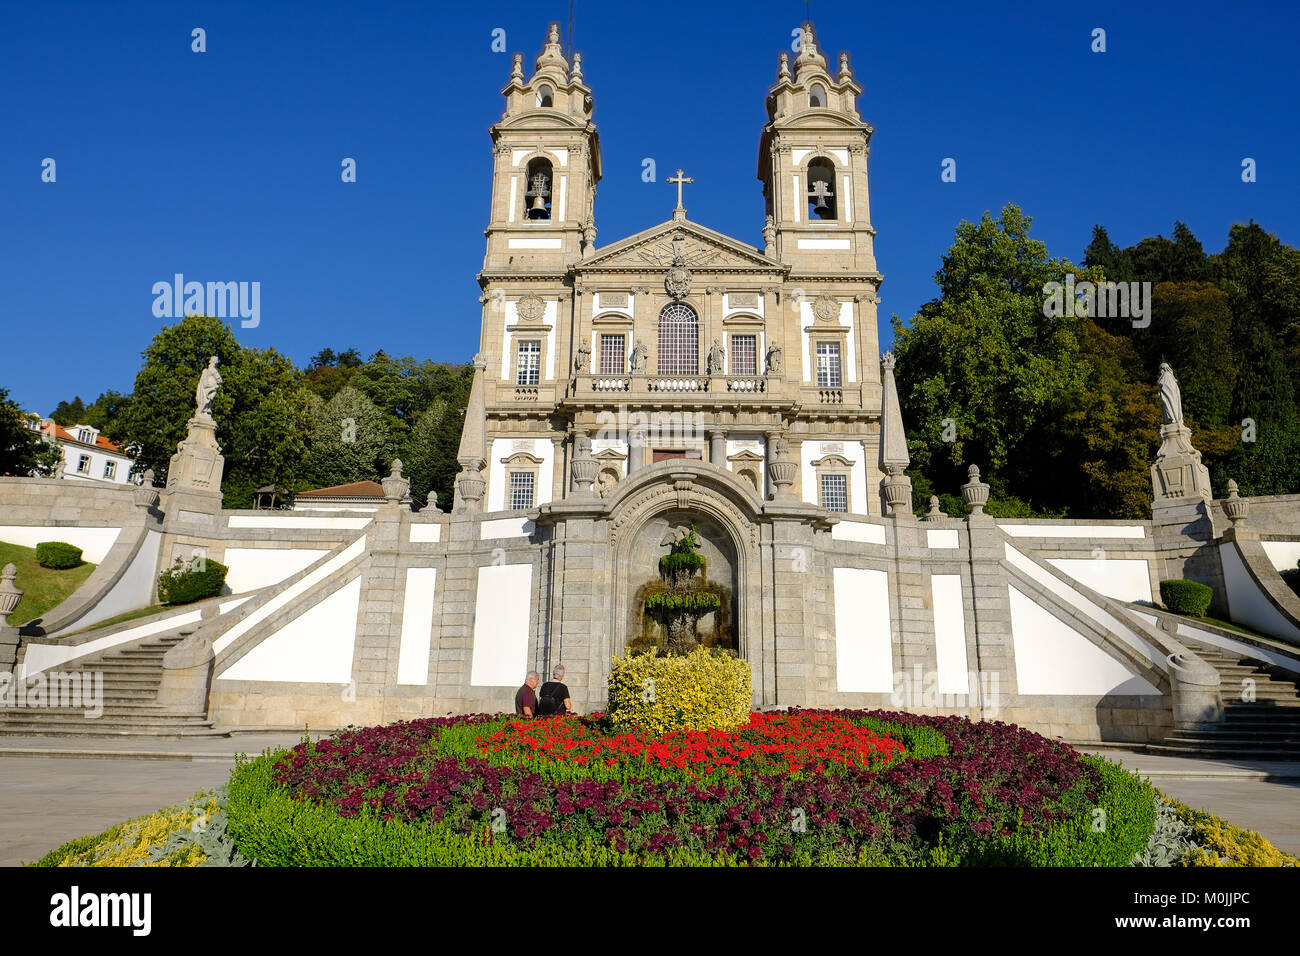 Sites of Braga in the North of Portugal, including the most polar site the church of Bom Jesus of Monte. Stock Photo